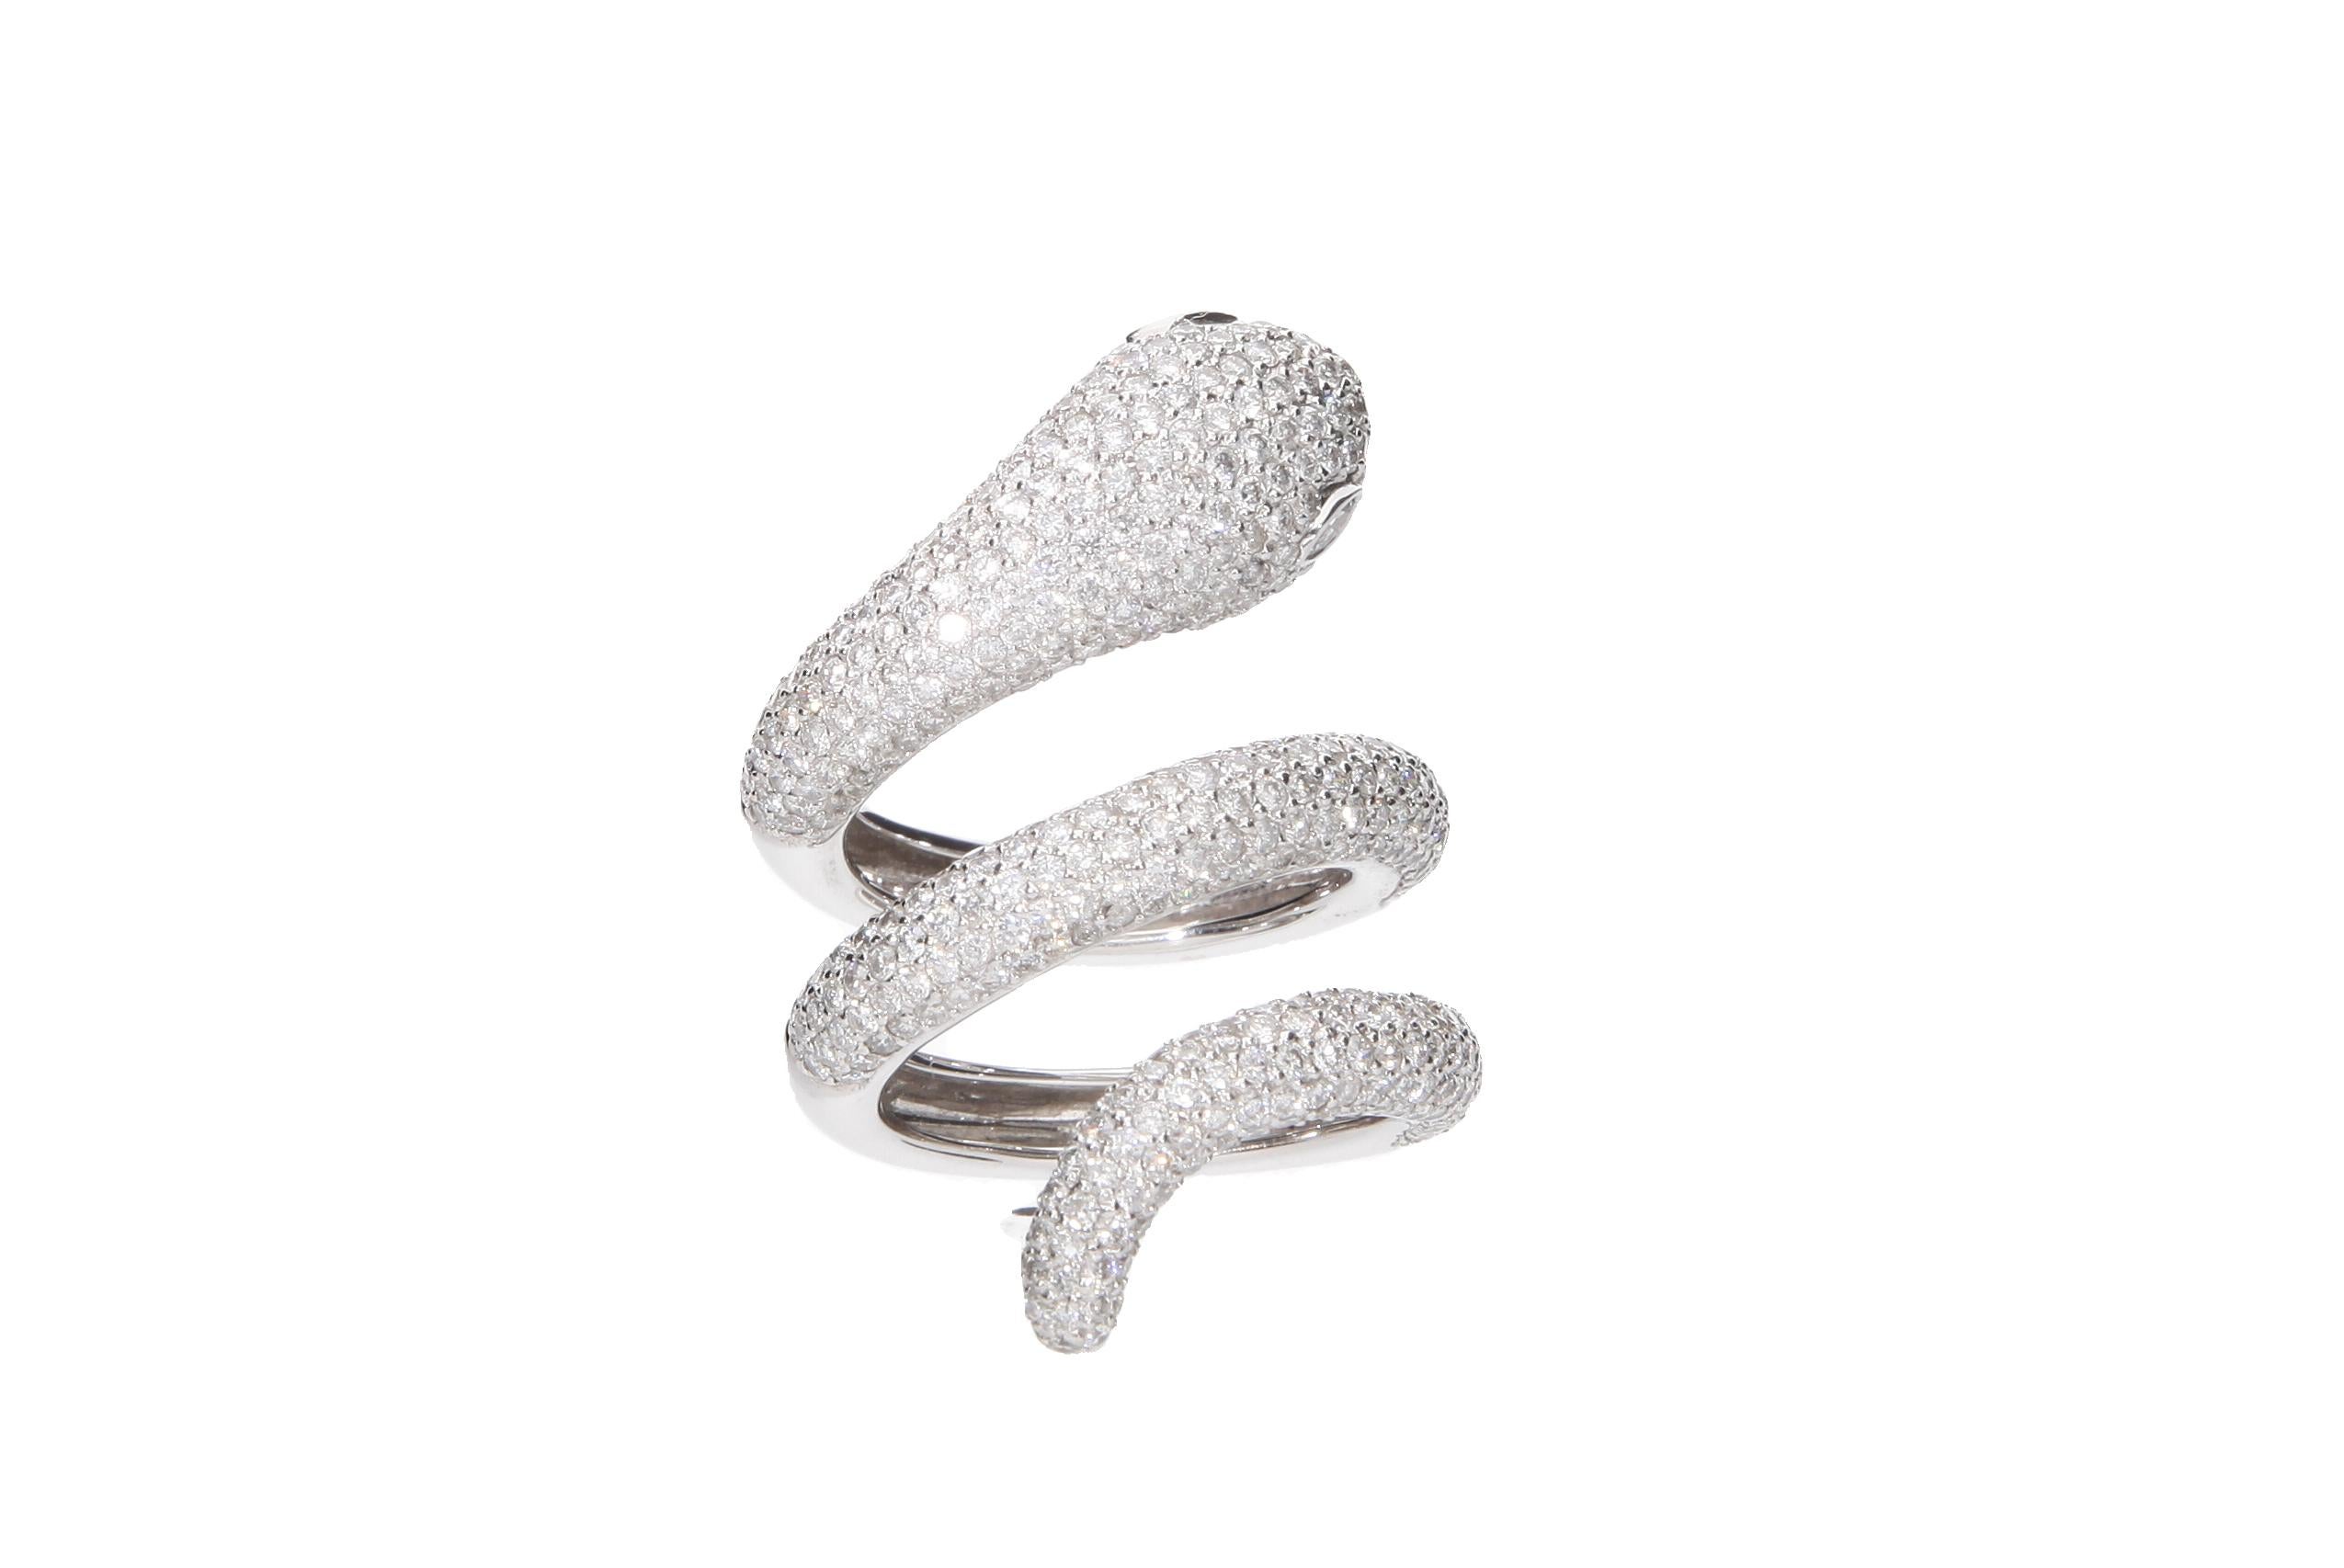 Snake ring, with 4.02 carats of diamonds set in pavé. Ring in 18 Kt White Gold. Made in Italy
Diamond Cocktail Ring
Total Diamonds Weight: ct. 4.02
Total Weight of 18 Kt Gold: 14.6 grams
Diamond Cut:  Round
Size: IT 13; USA 6.25; FR 53 
It is